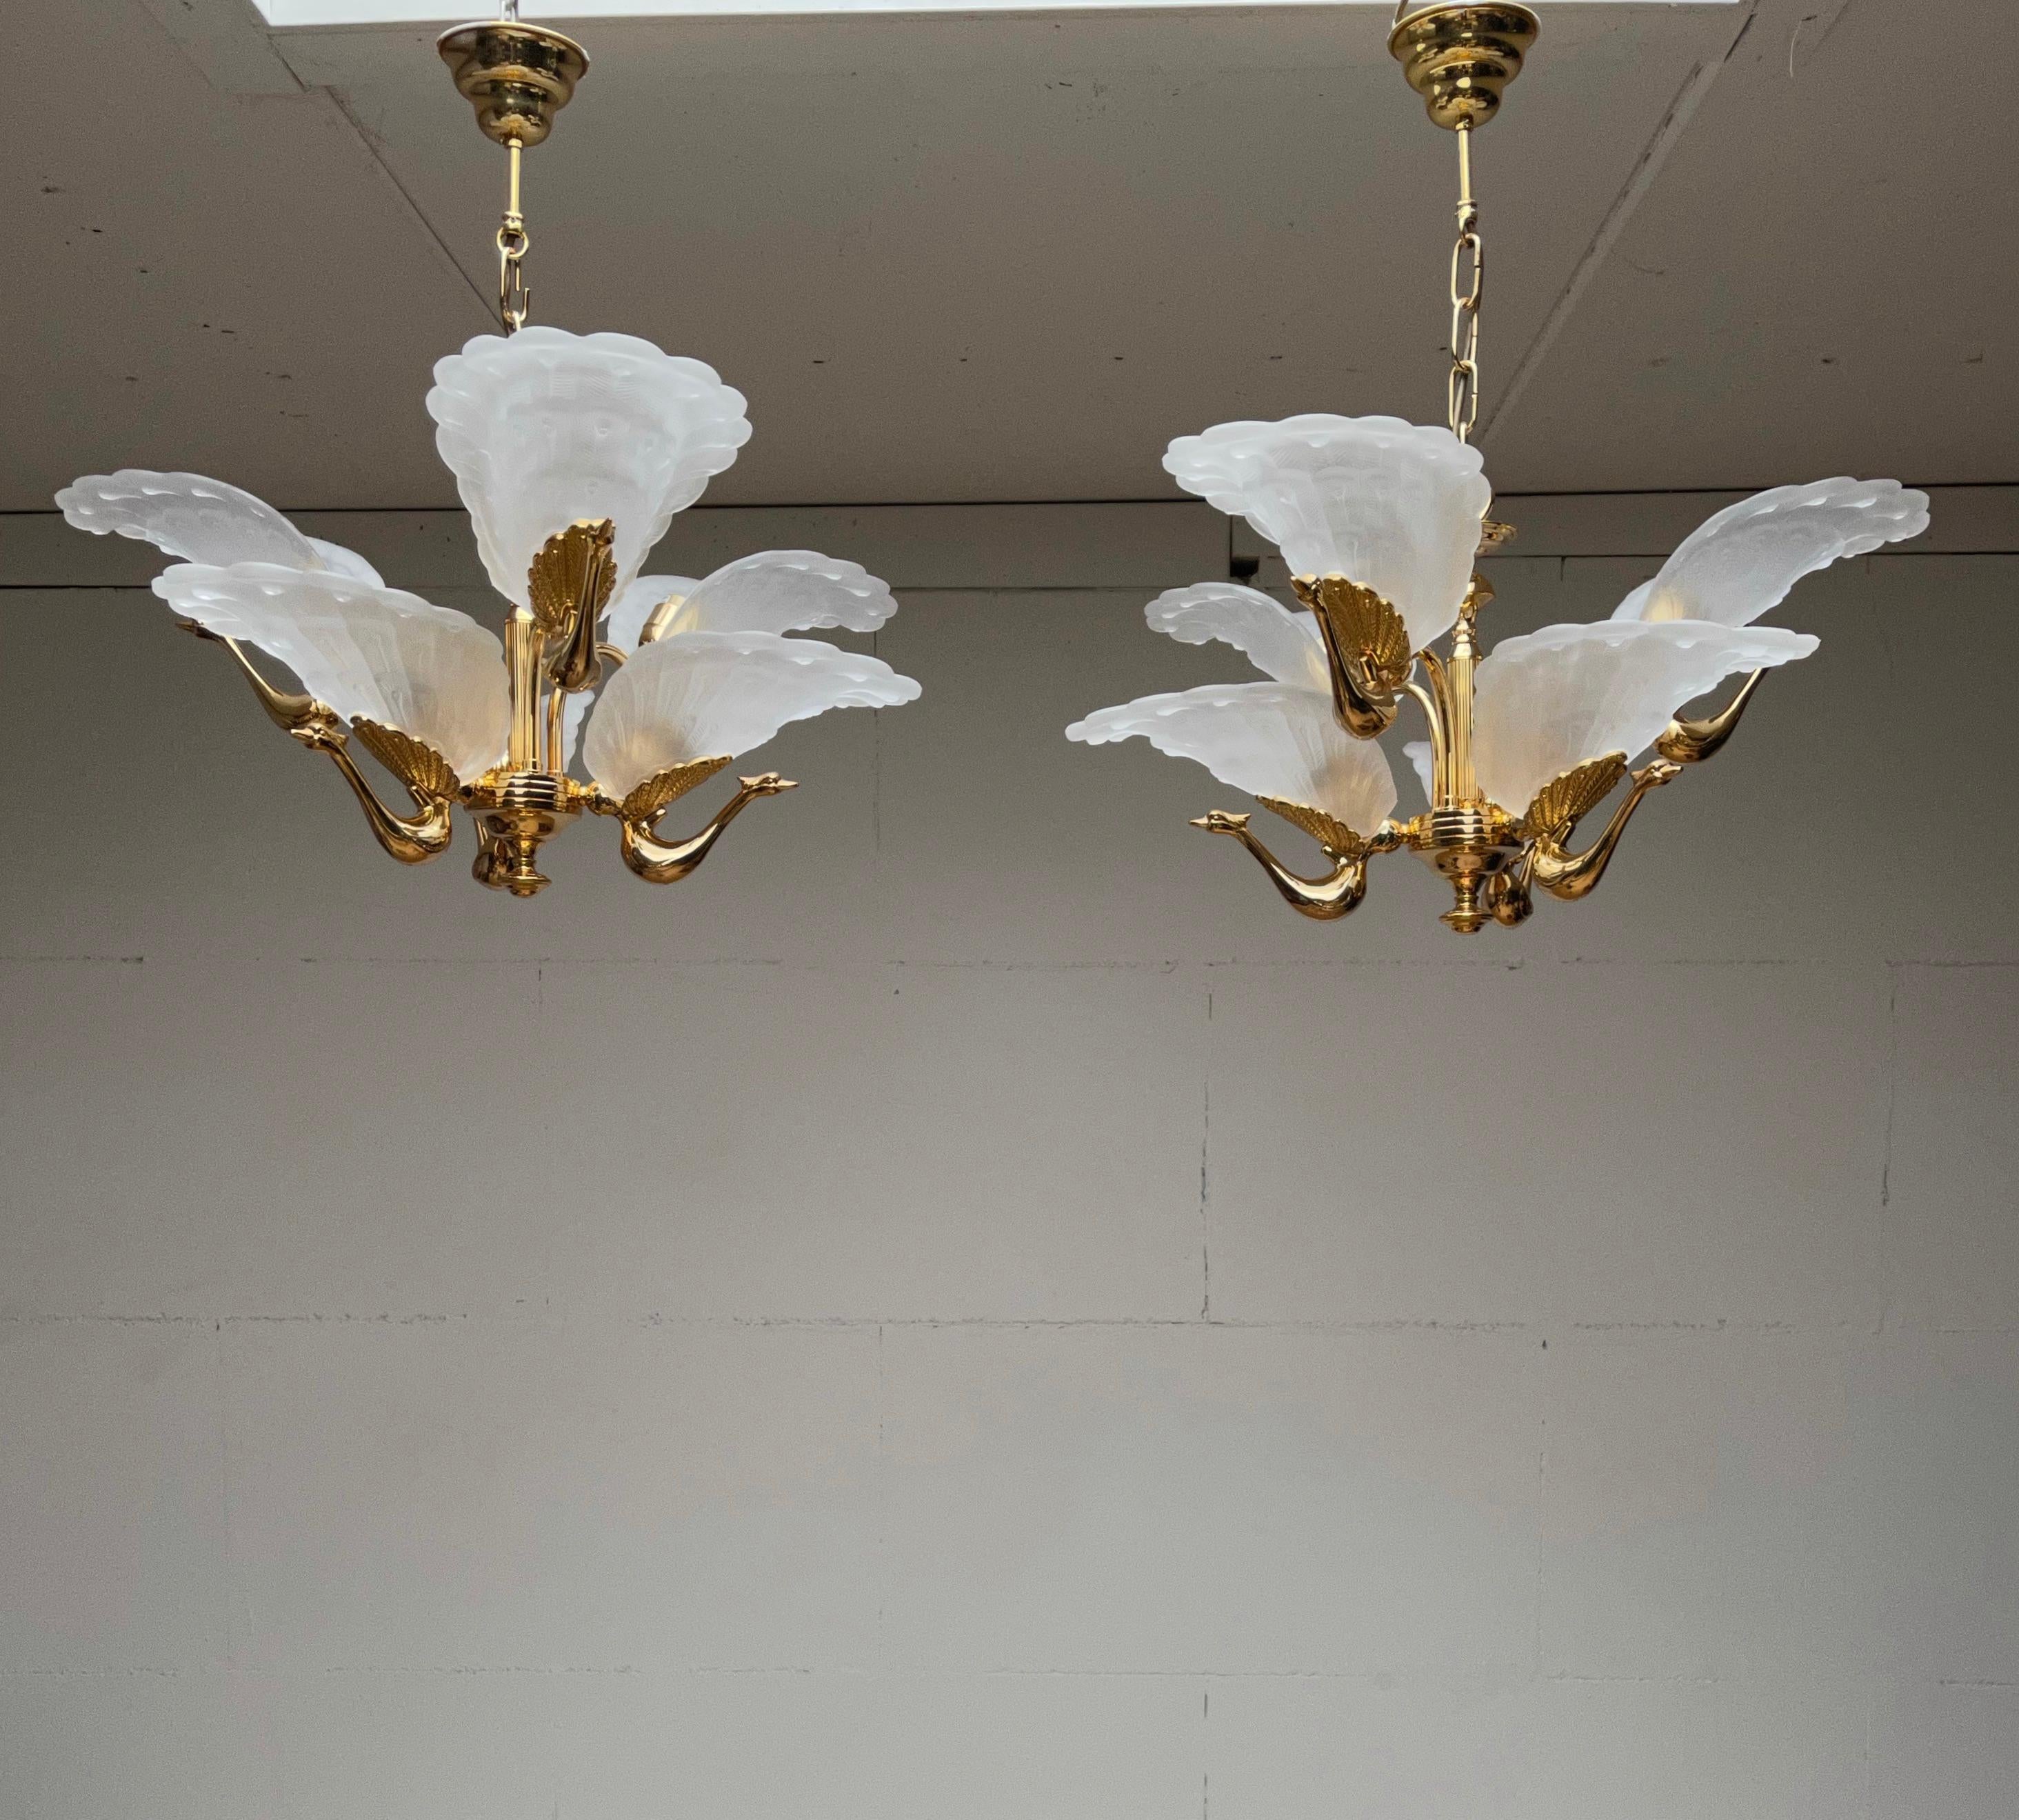 Sculptural and highly decorative two-tier light fixtures.

The peacock has, since ancient times, been regarded as an animal with many positive and even healing characteristics. And that has inspired many artist and designers through all times and